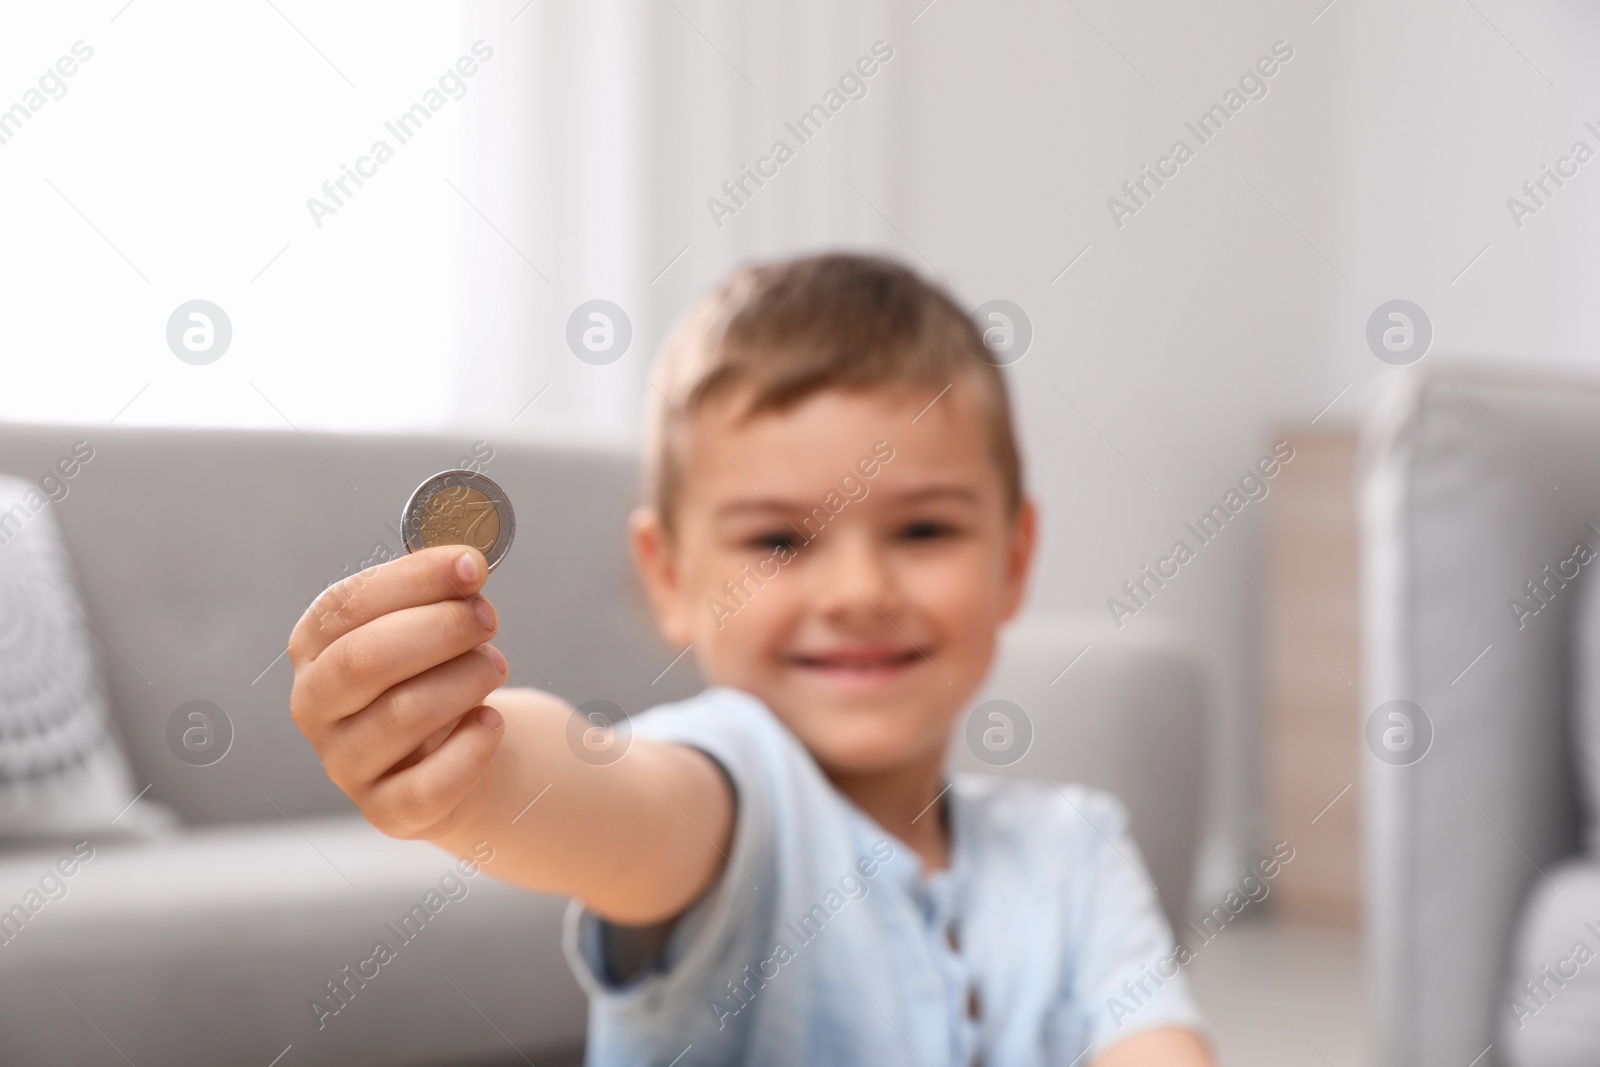 Photo of Cute little boy holding coin at home, focus on hand